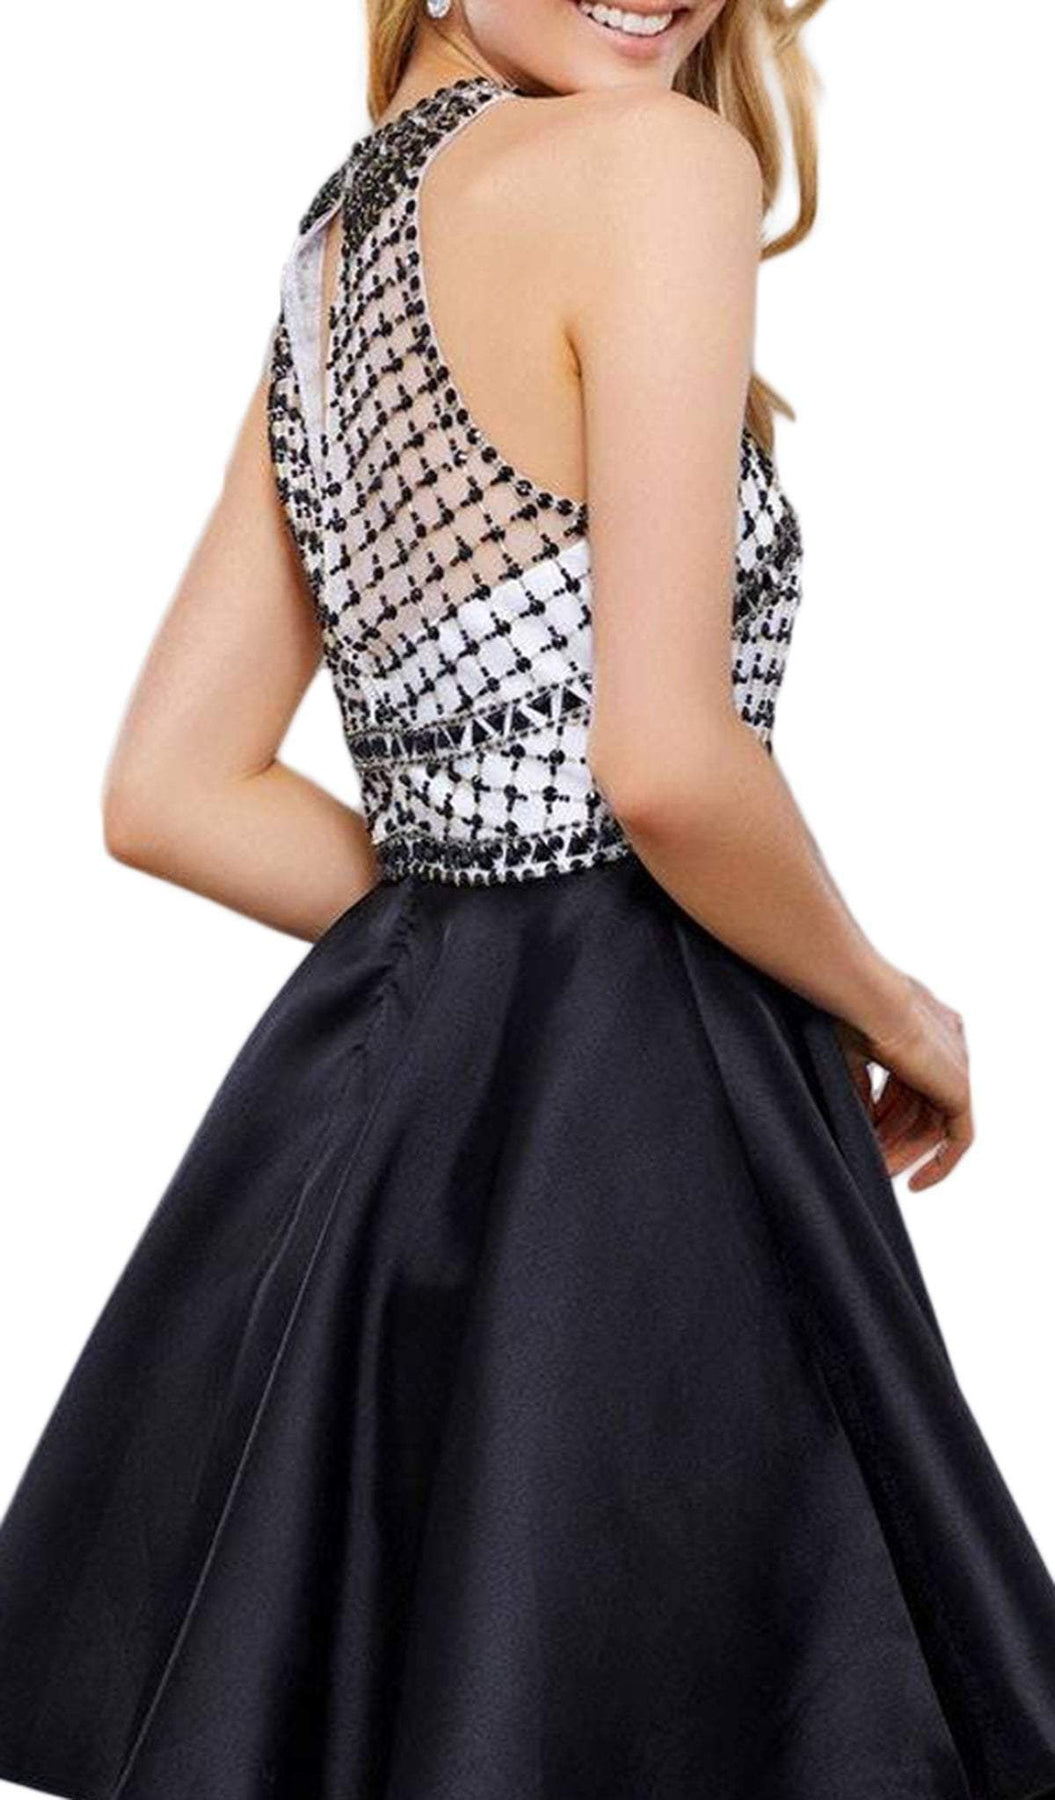 Nox Anabel - 6243 High Halter Illusion Lattice Cocktail Dress Special Occasion Dress